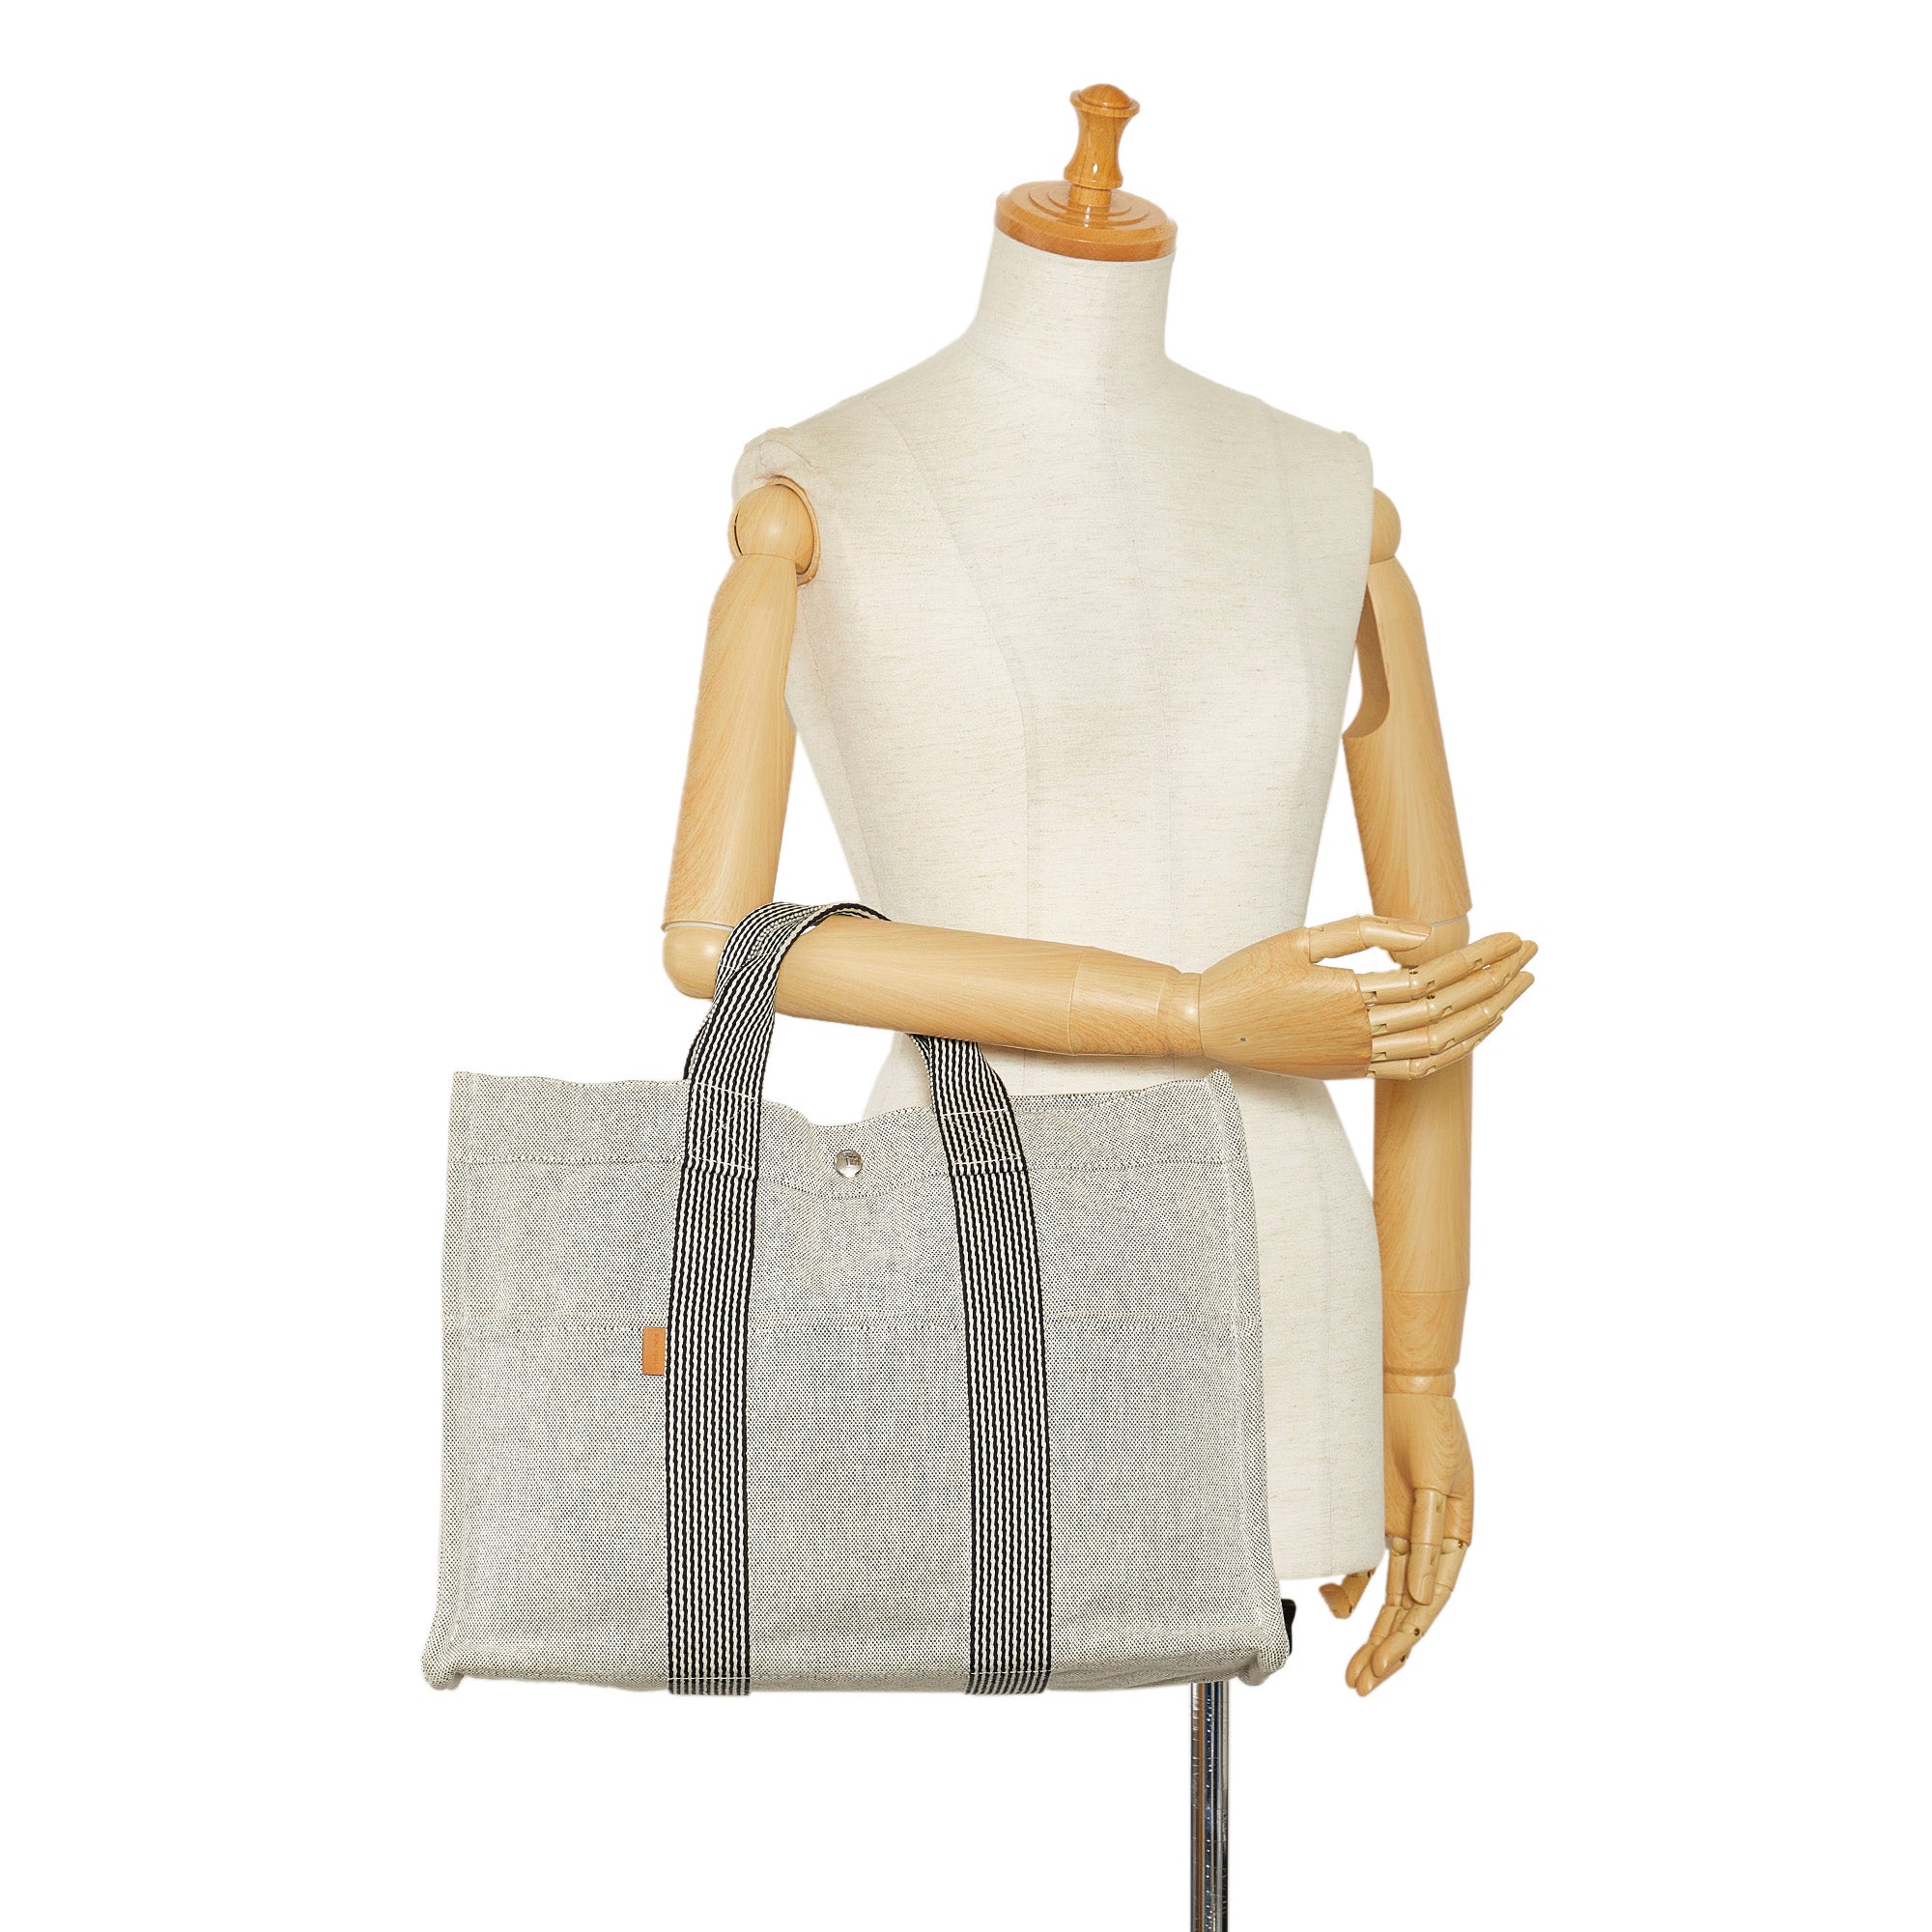 Pre Loved Hermes Fourre Tout mm Tote Bag Canvas Gray Gray Women